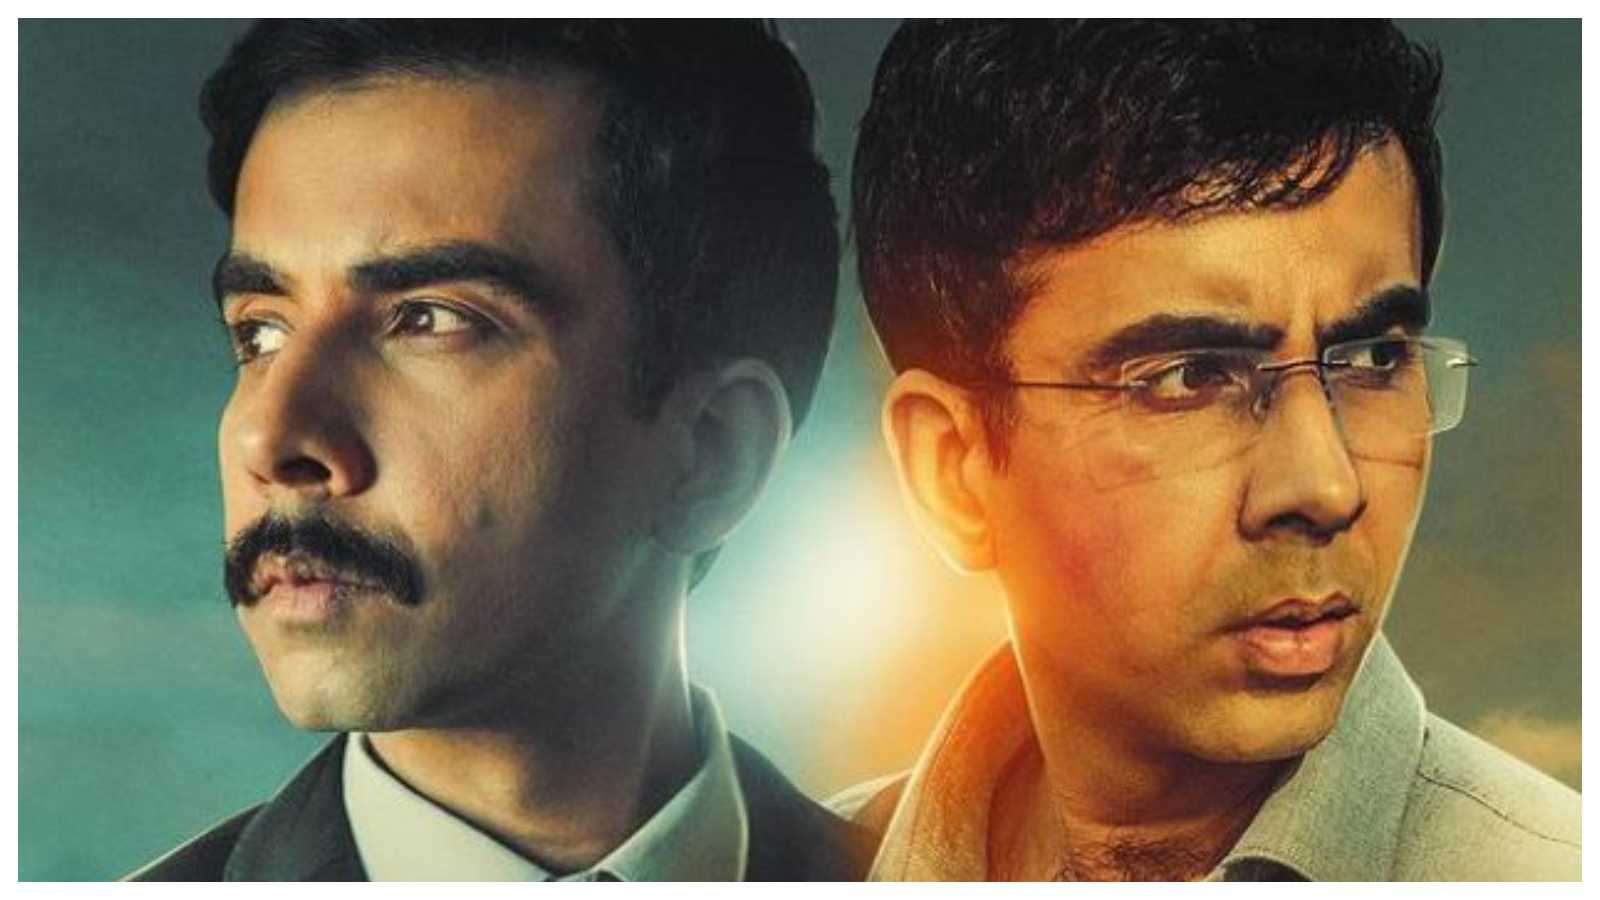 Aspirants Season 2 trailer: Naveen Kasturia, Sunny Hinduja are back with a new IAS chapter, fans can’t keep calm